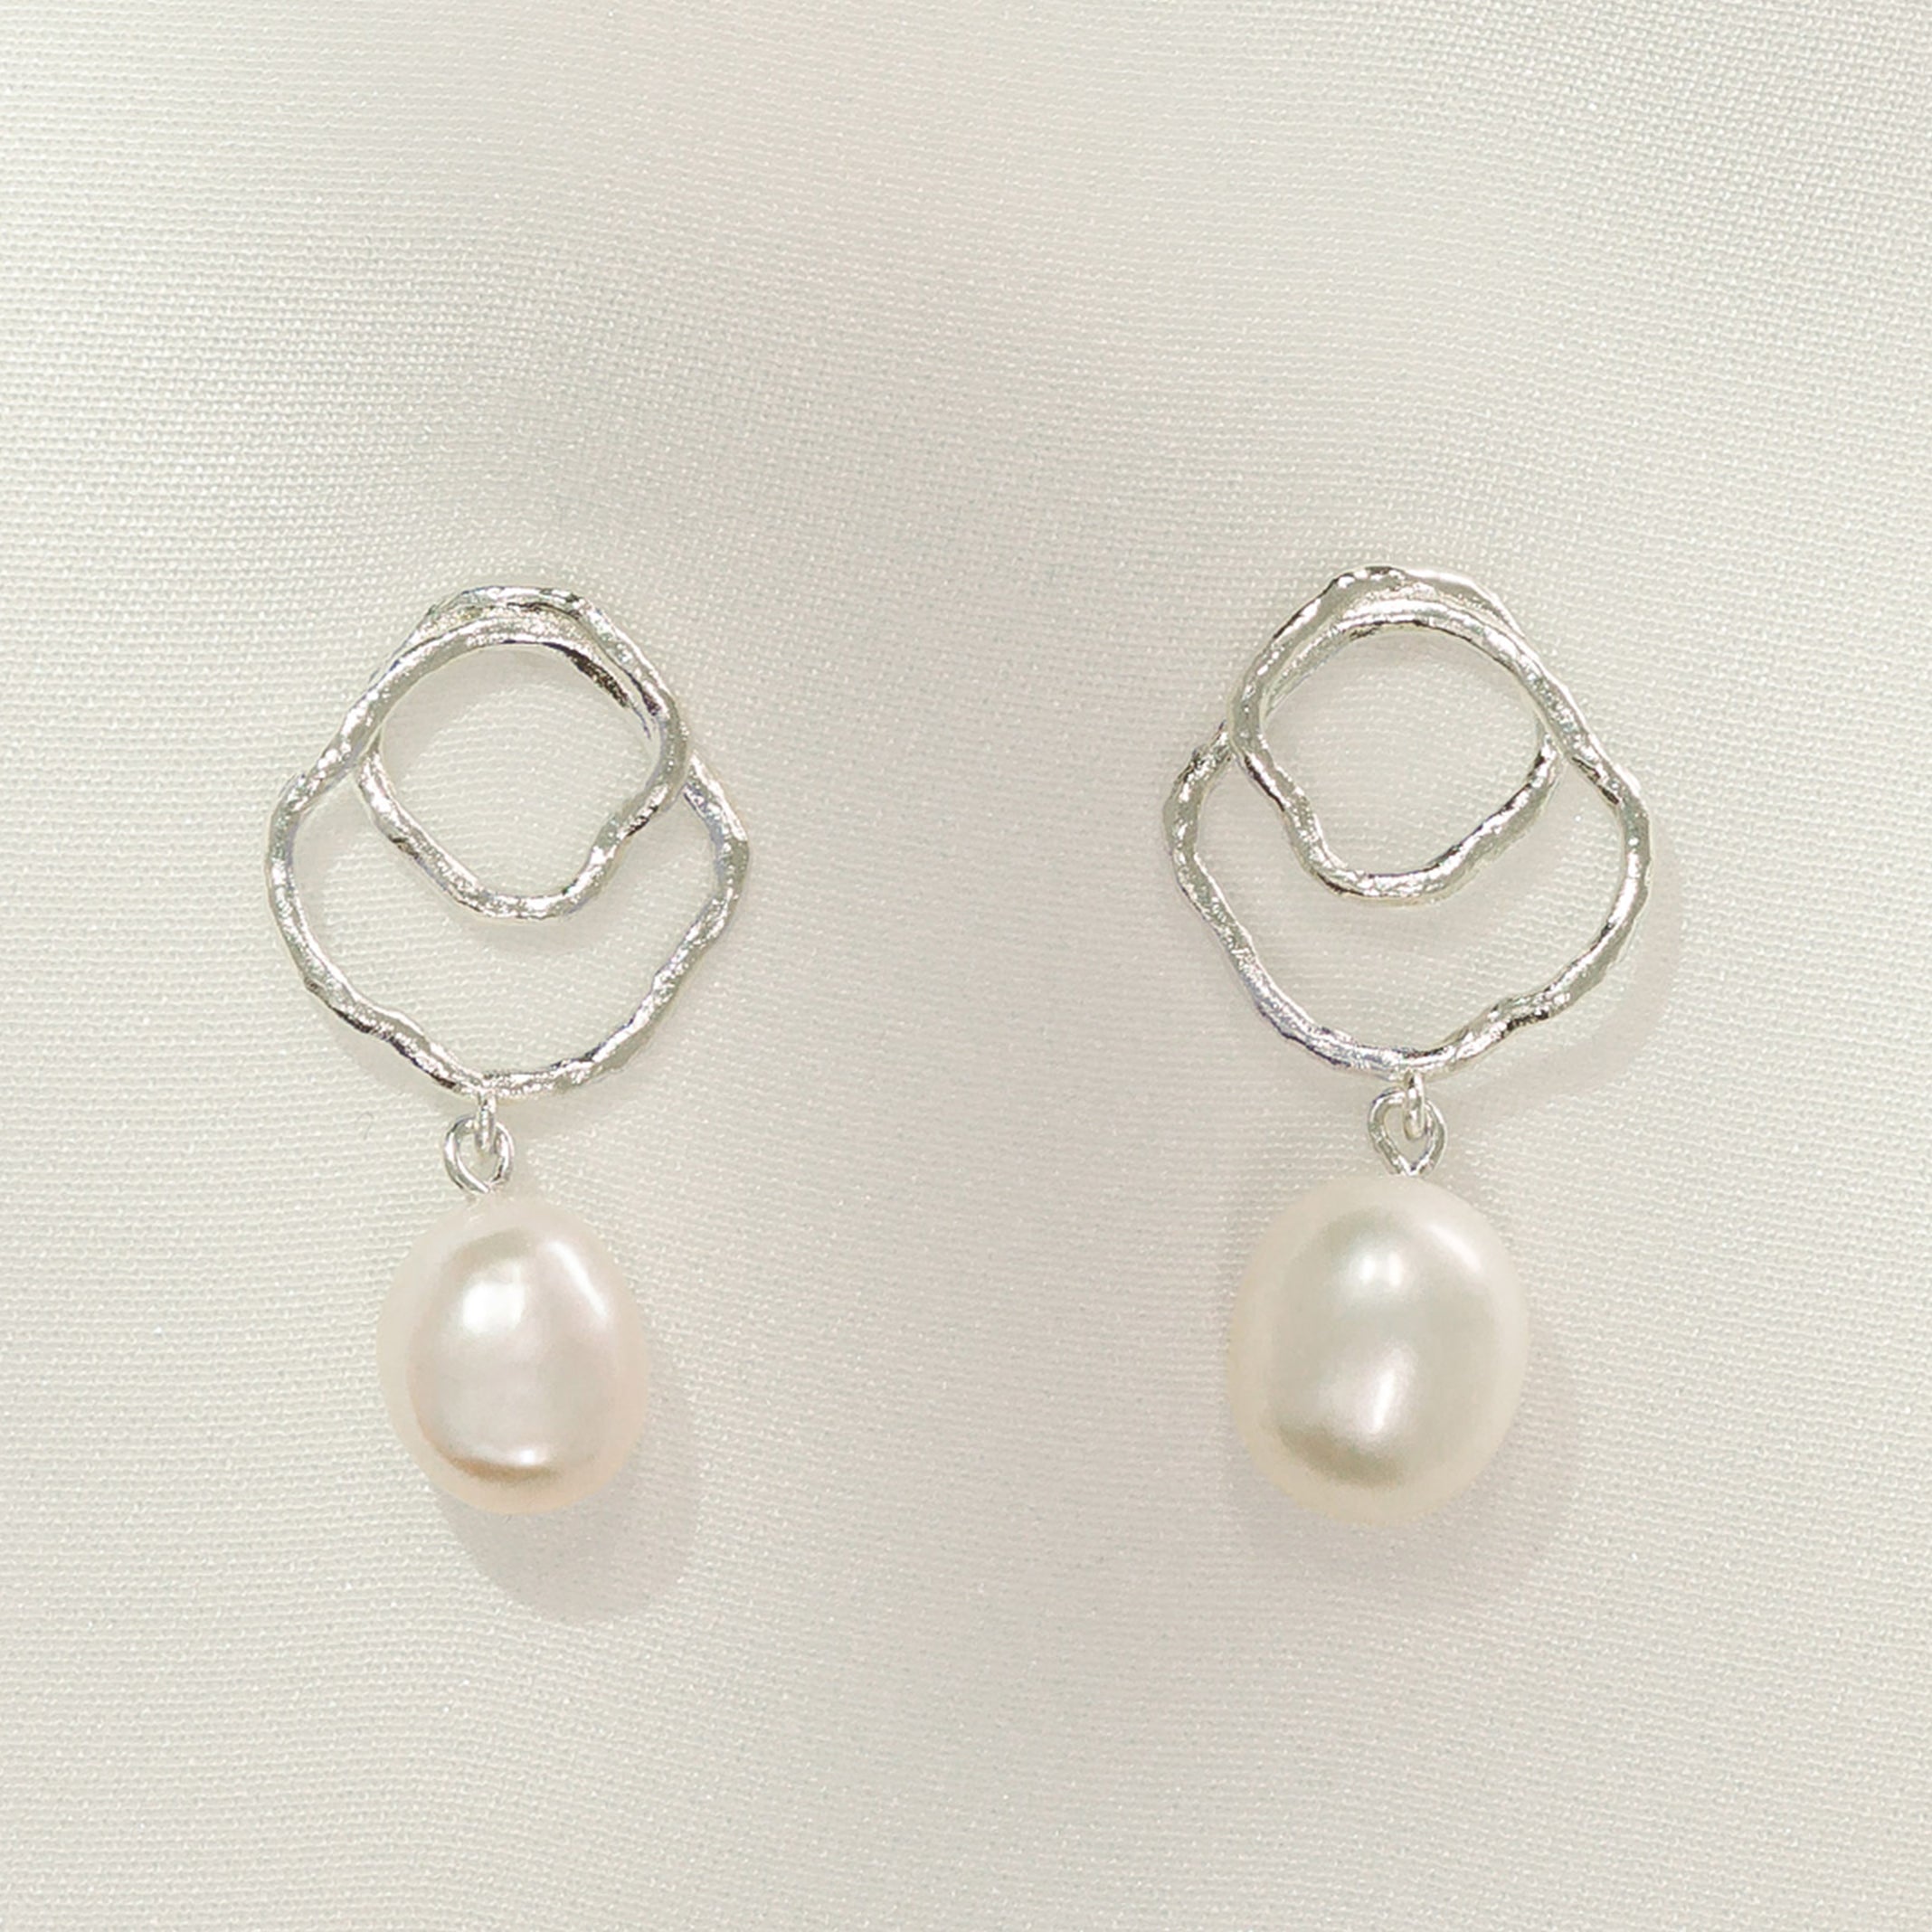 Célaphine Silver Earrings